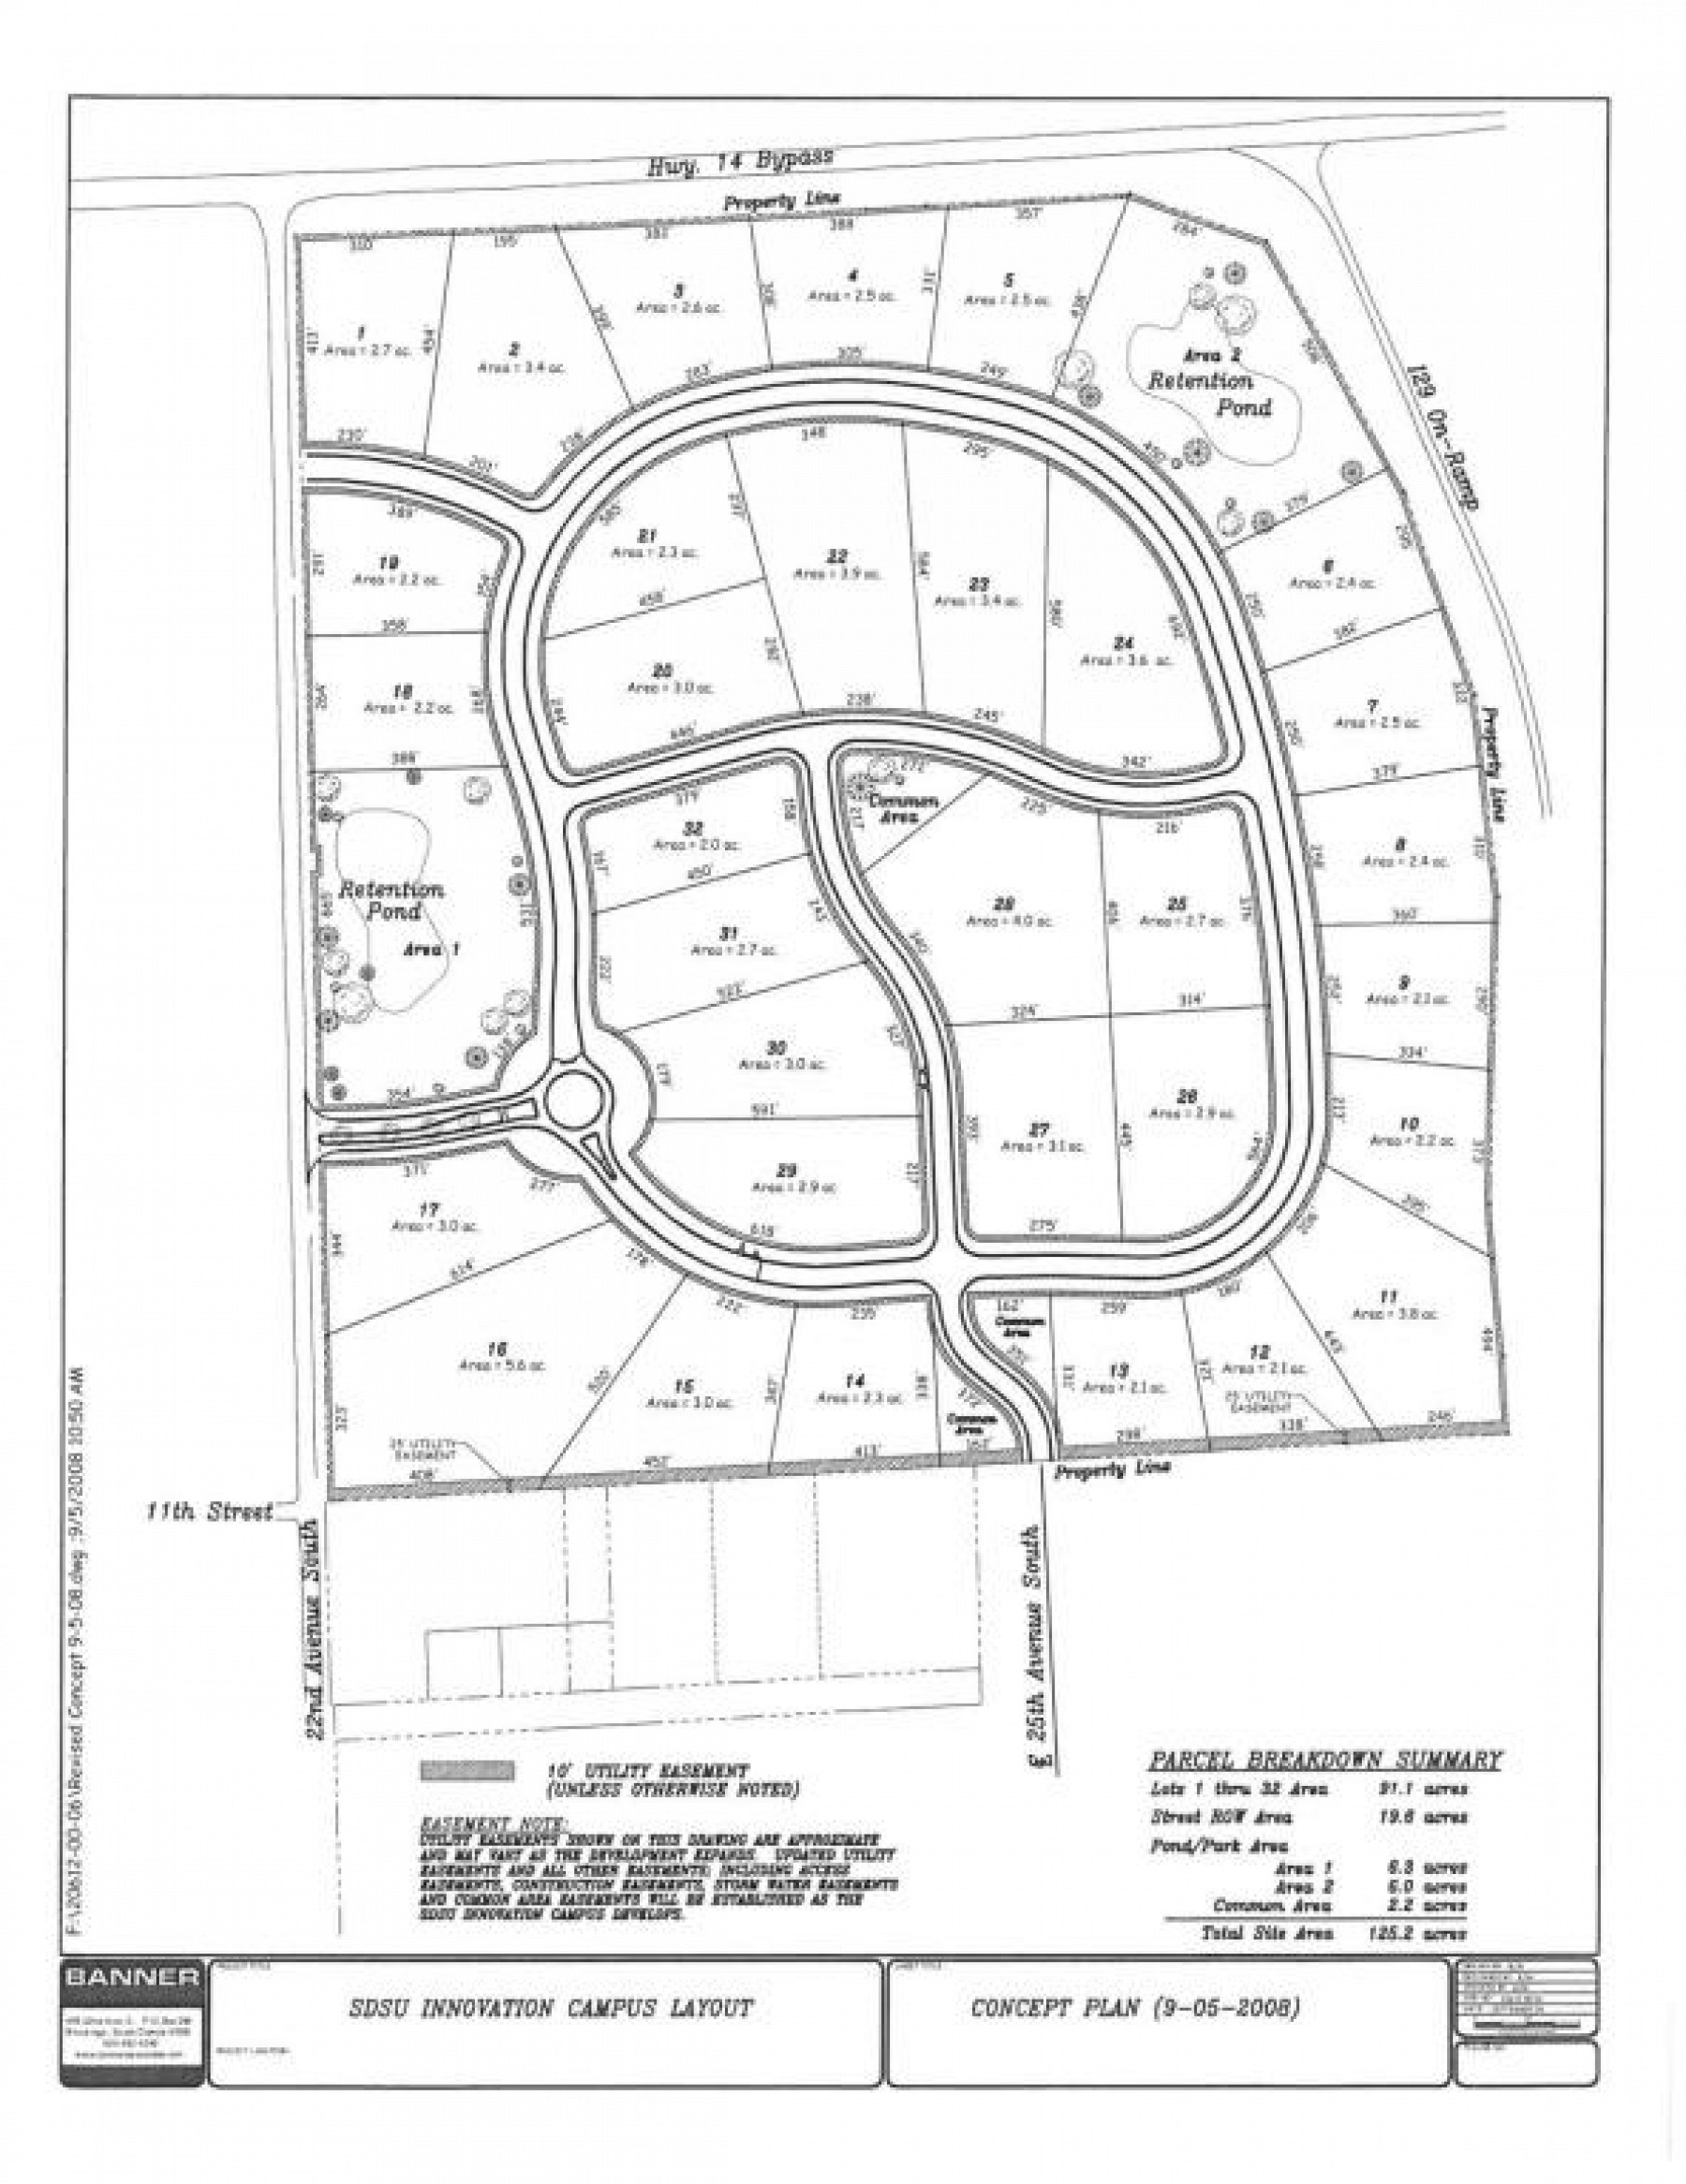 Lot 21 Innovation Campus, Brookings, SD 57006